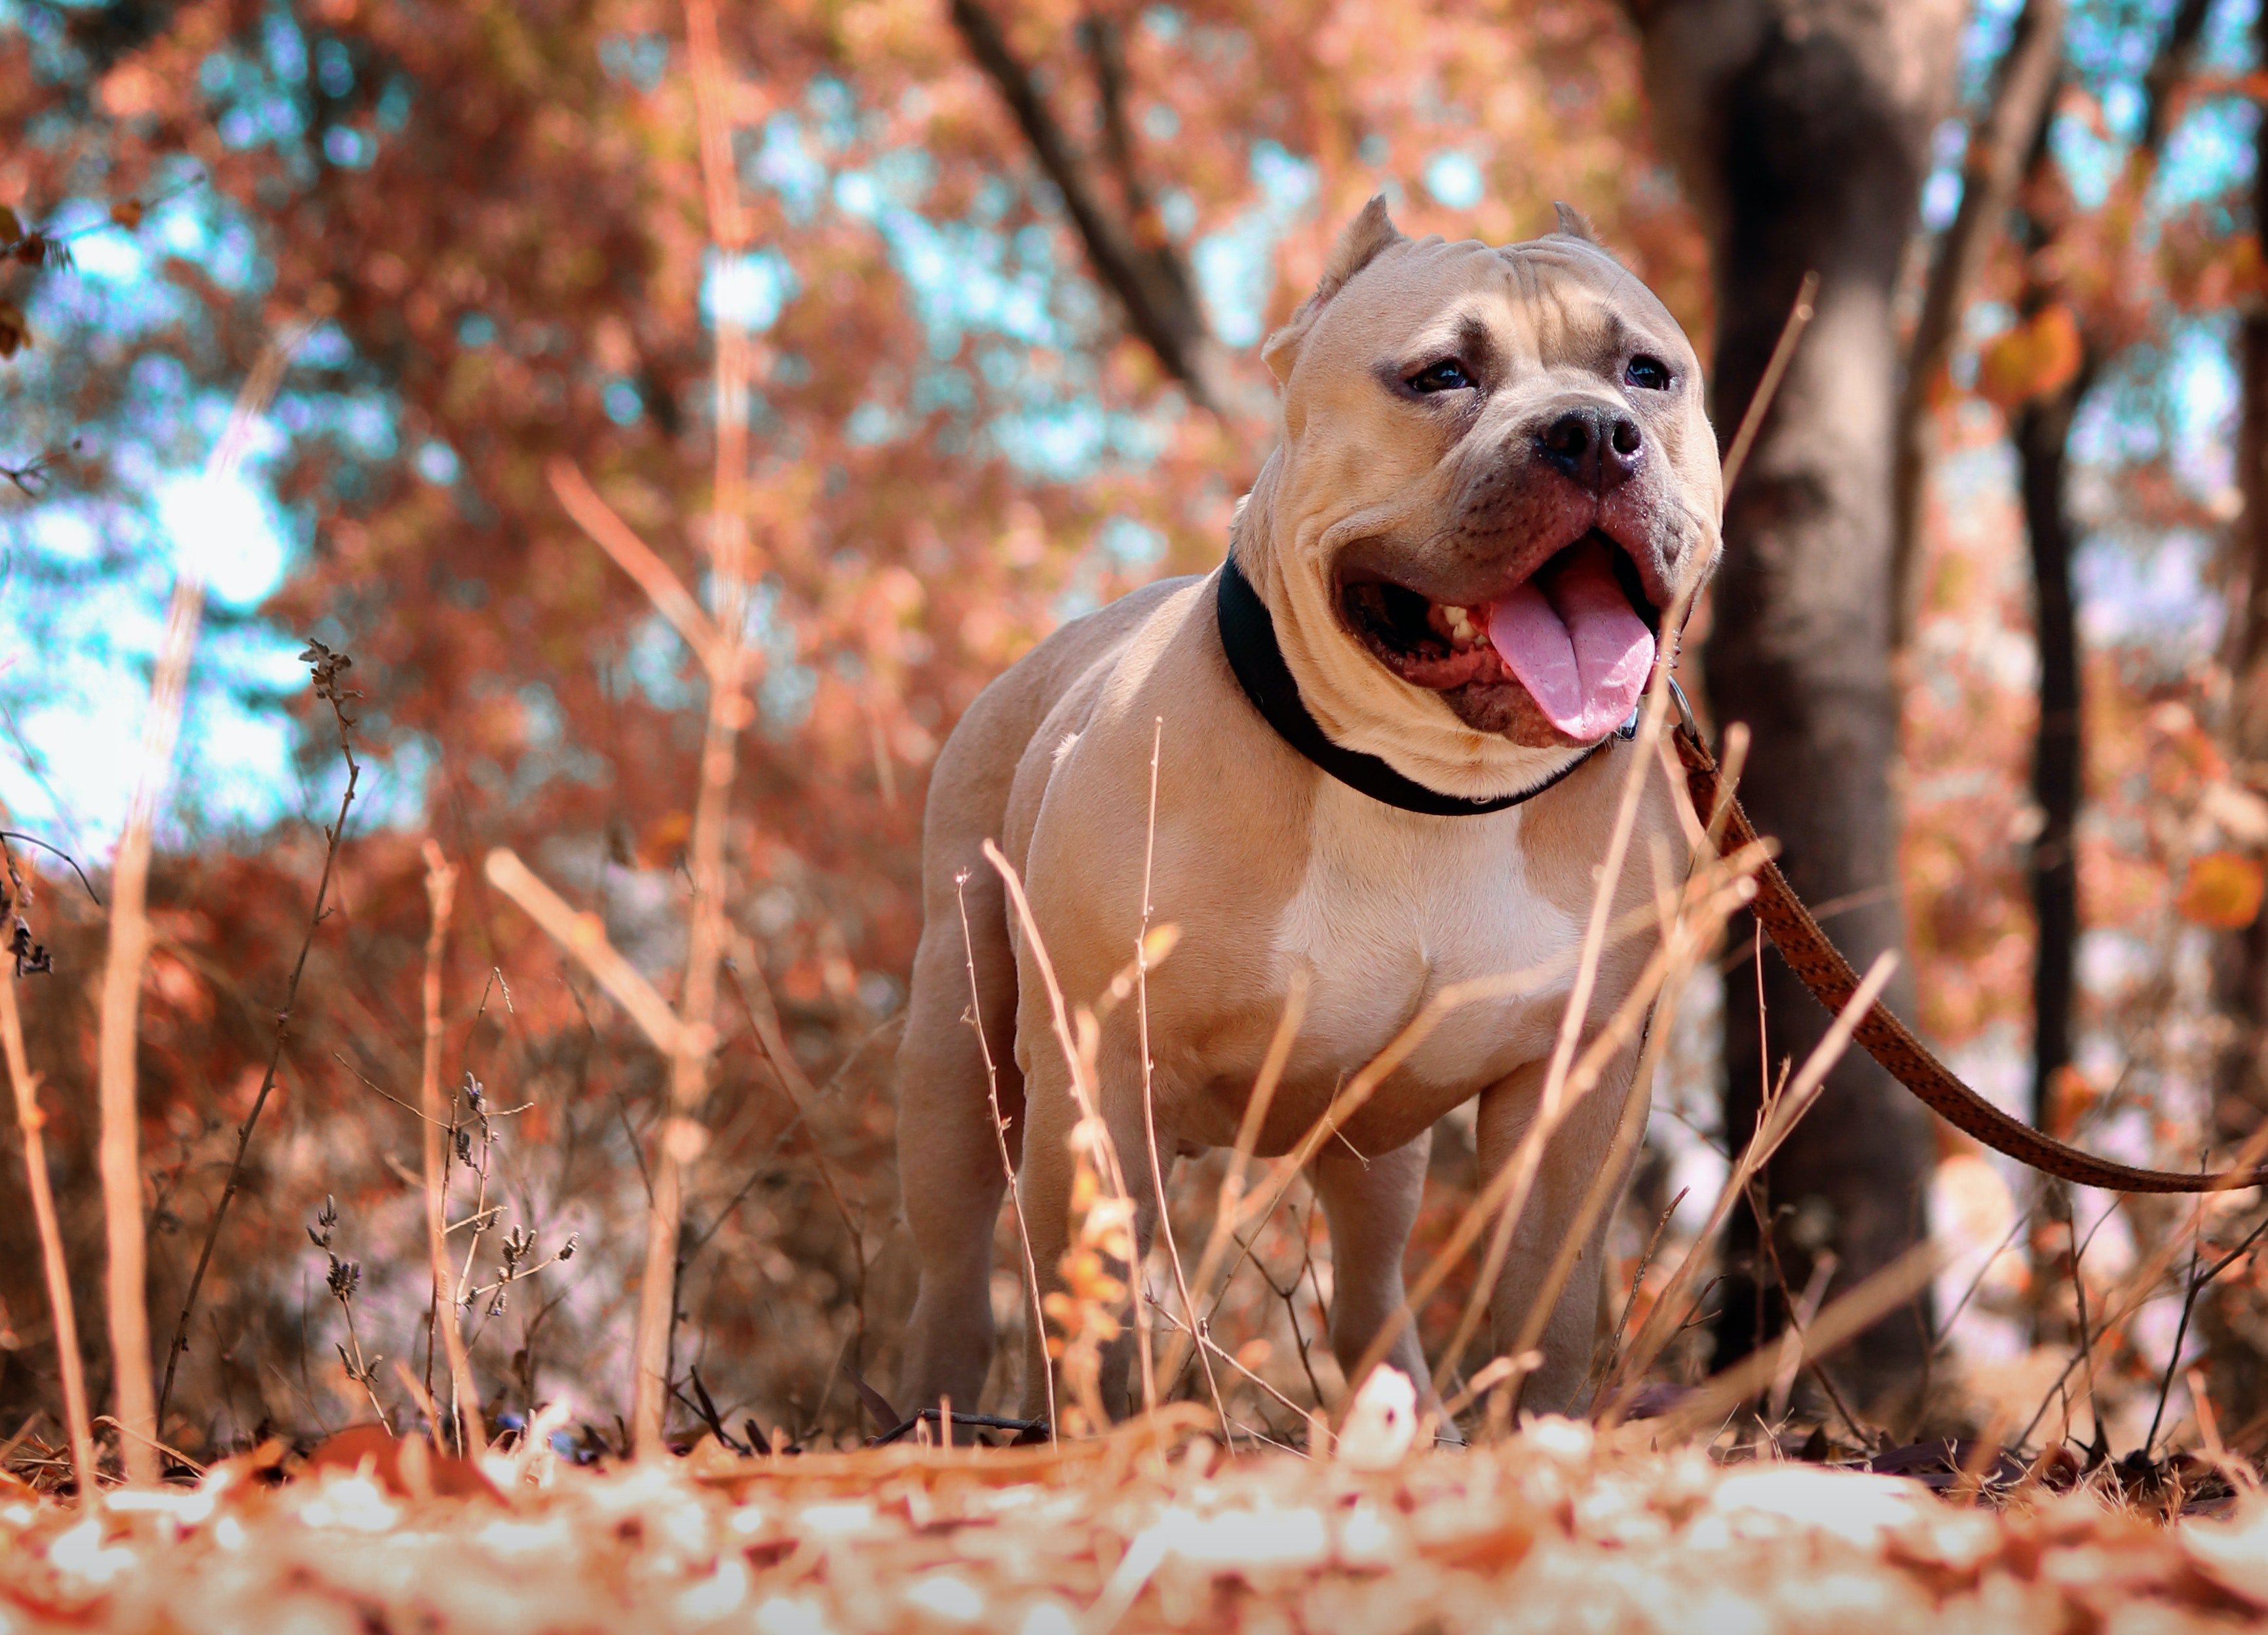 Pictured - An image of a brown pit bull dog in the woods | Source: Pexels 